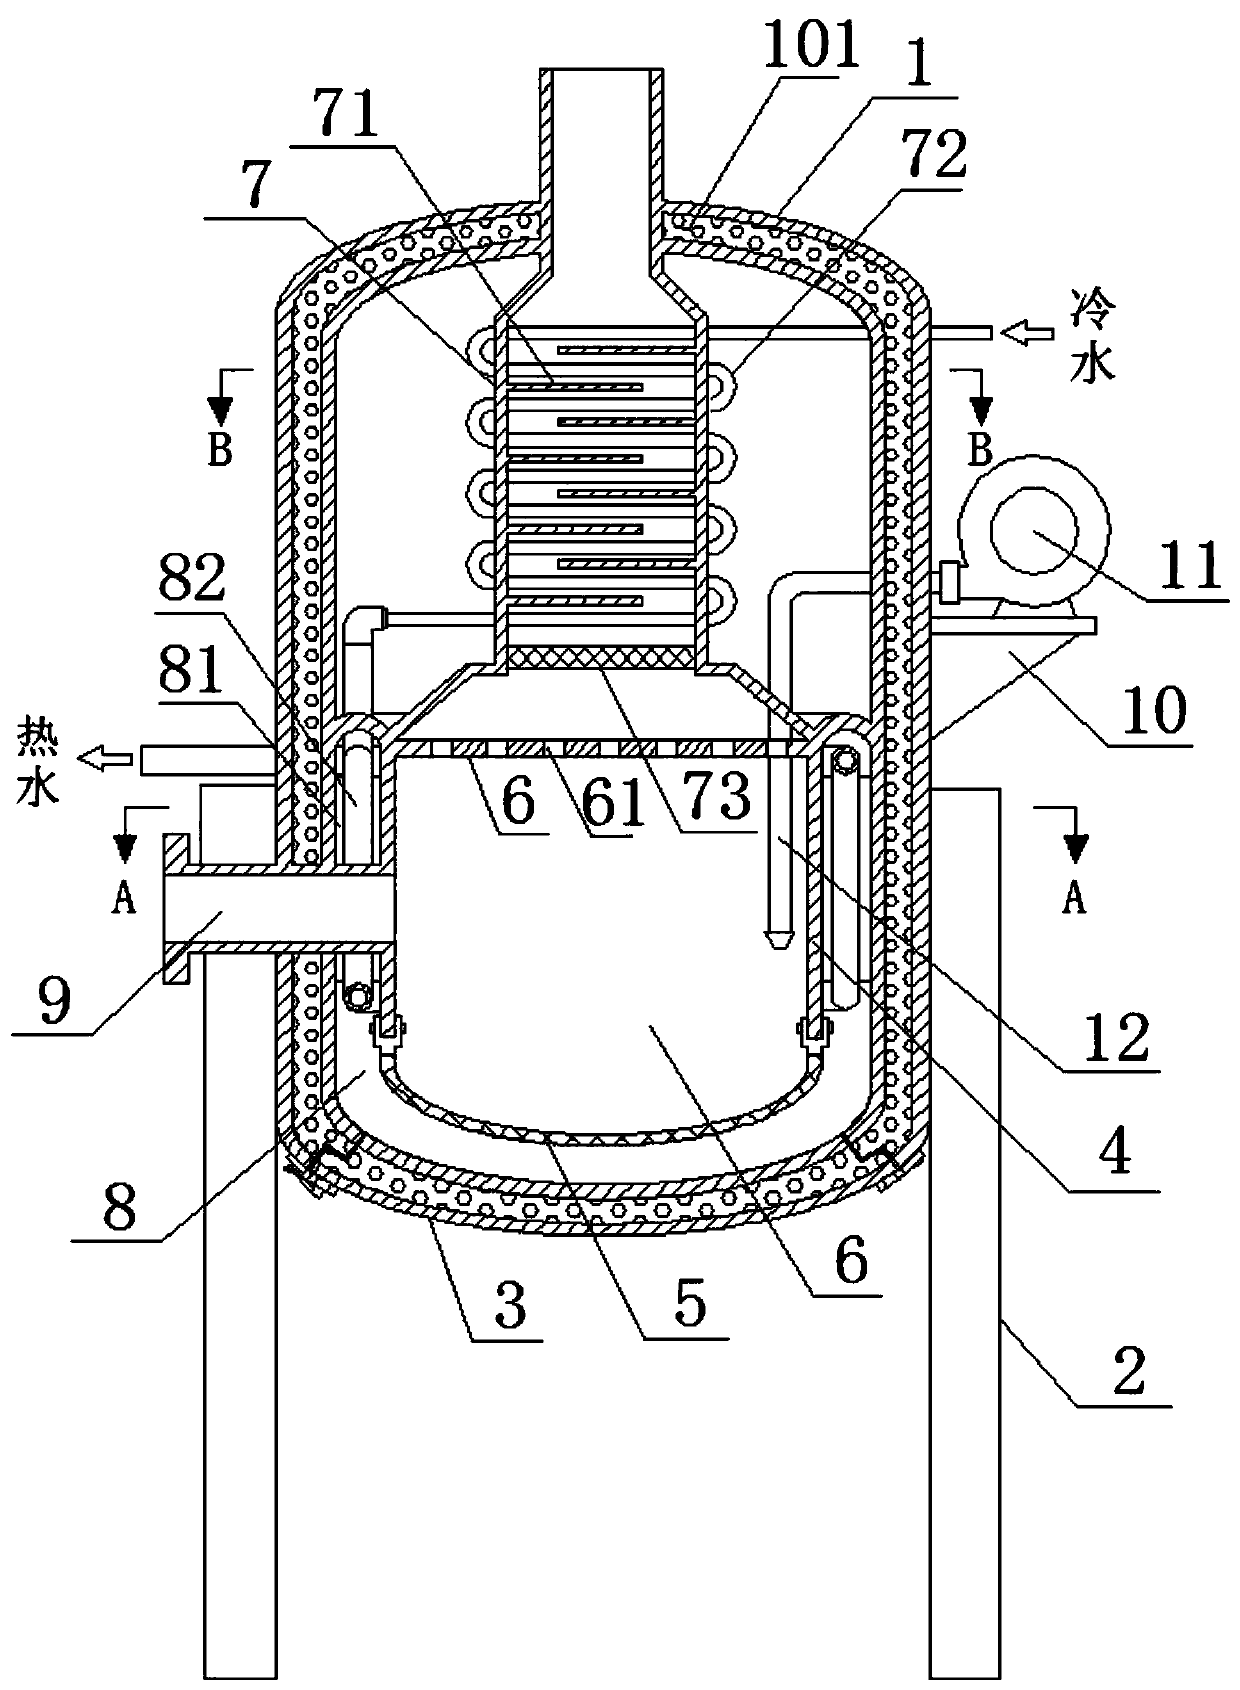 Combustion cavity structure of environment-friendly combustible waste heat recovery device